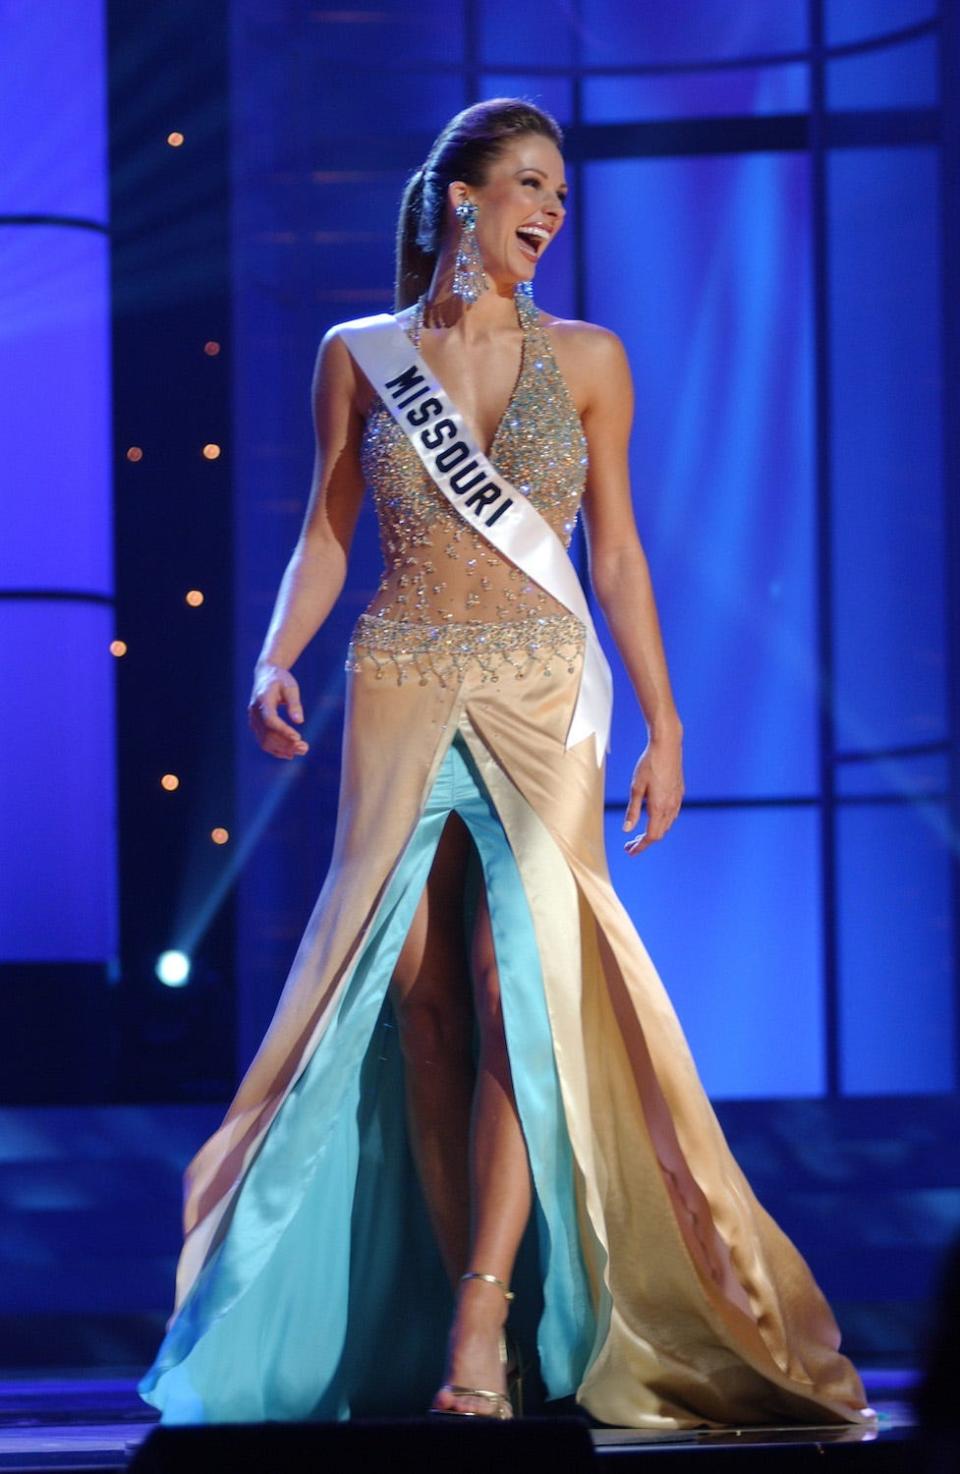 Shandi Finnessey during the Miss USA 2004.